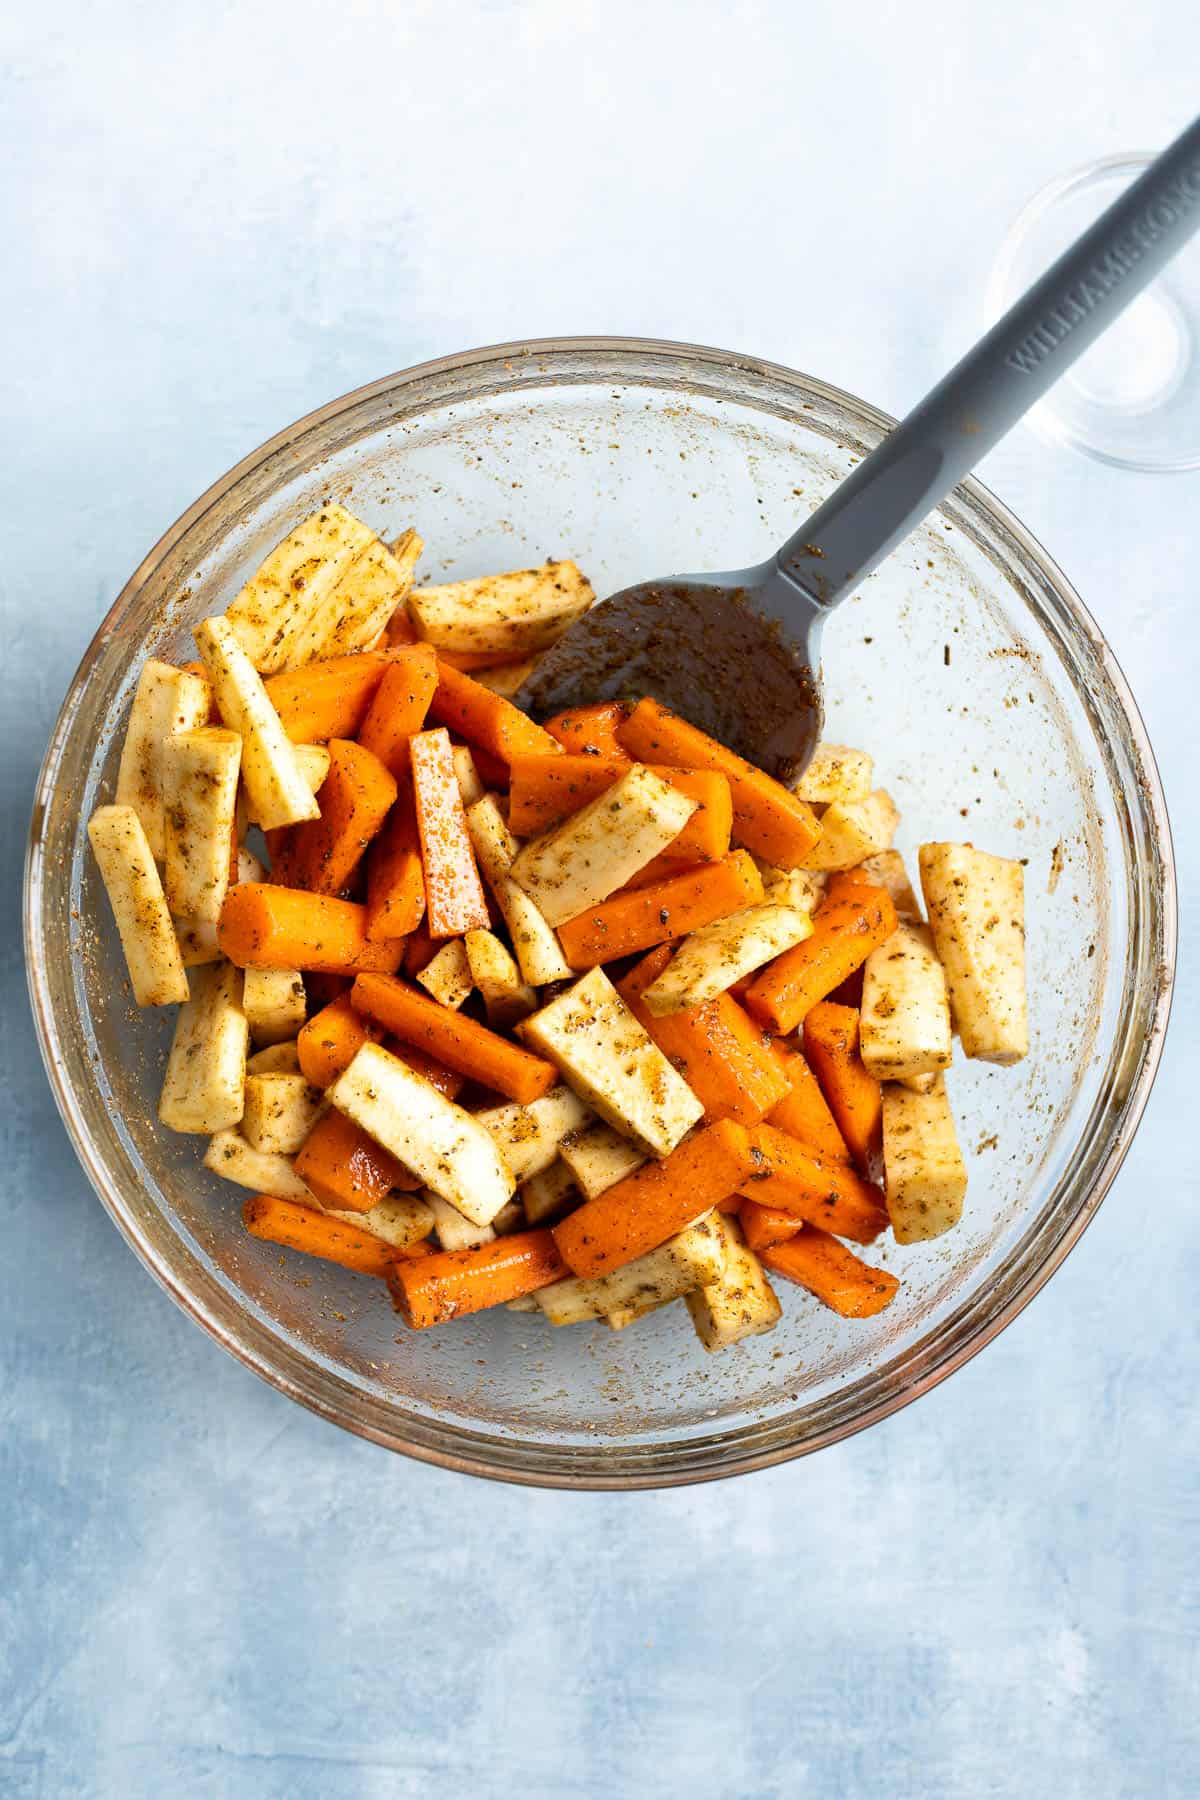 The carrots and parsnips tossed with oil, honey, and spices.